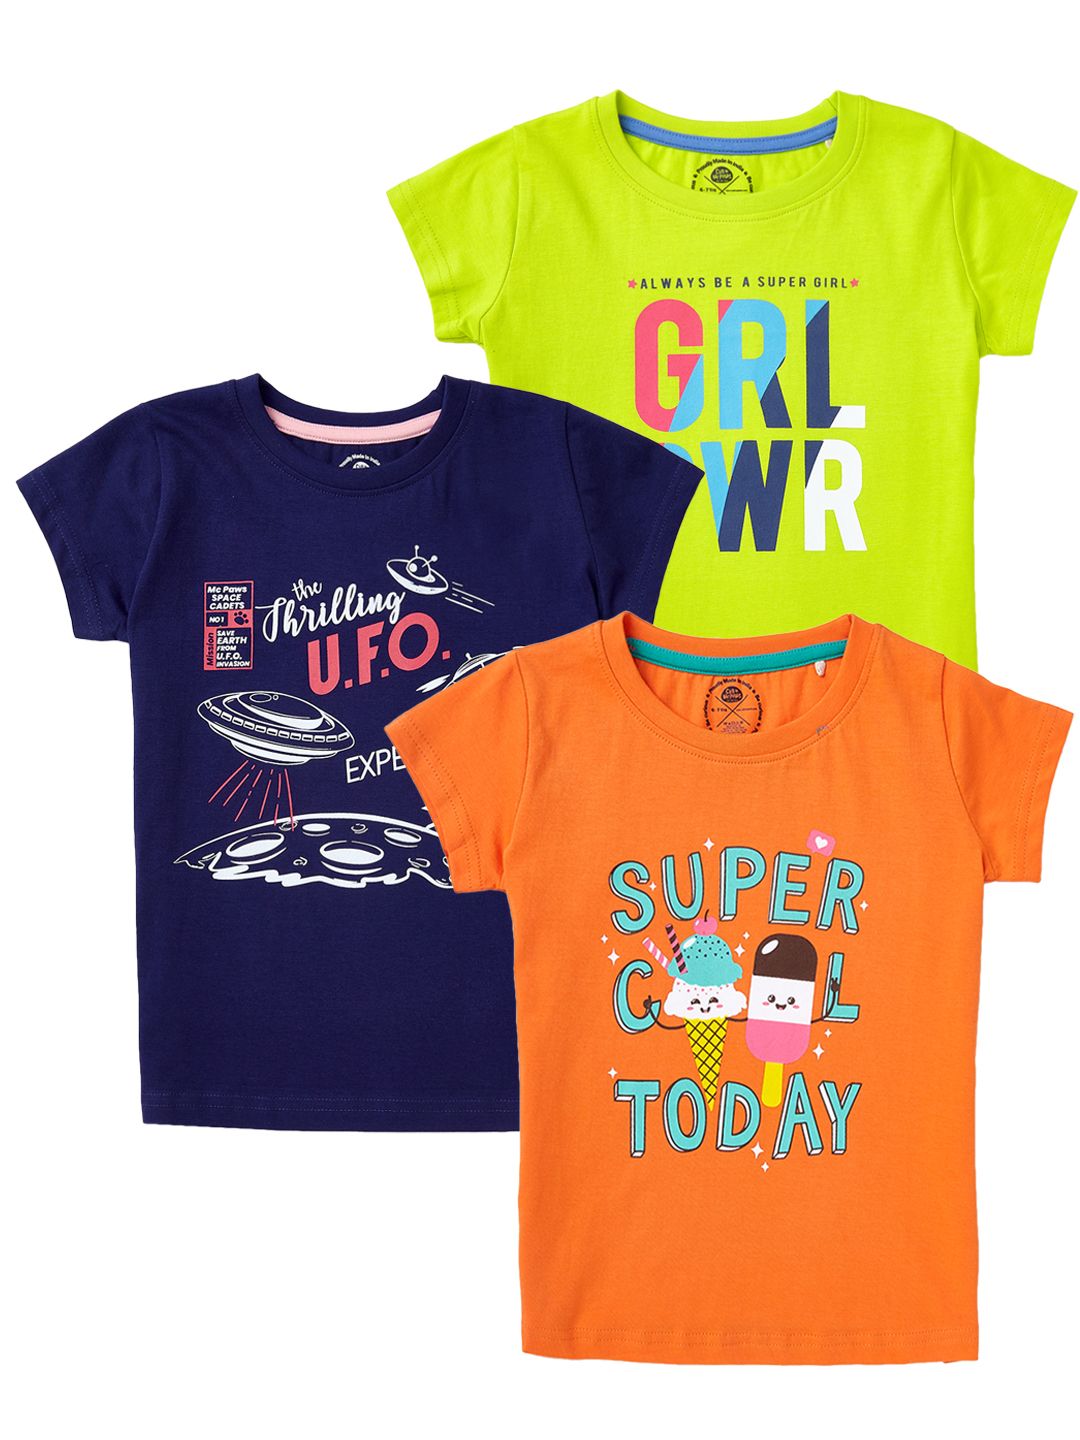 Girls Pack of 3 T-Shirts Half Sleeves,(includes 1 Magic T-shirt)